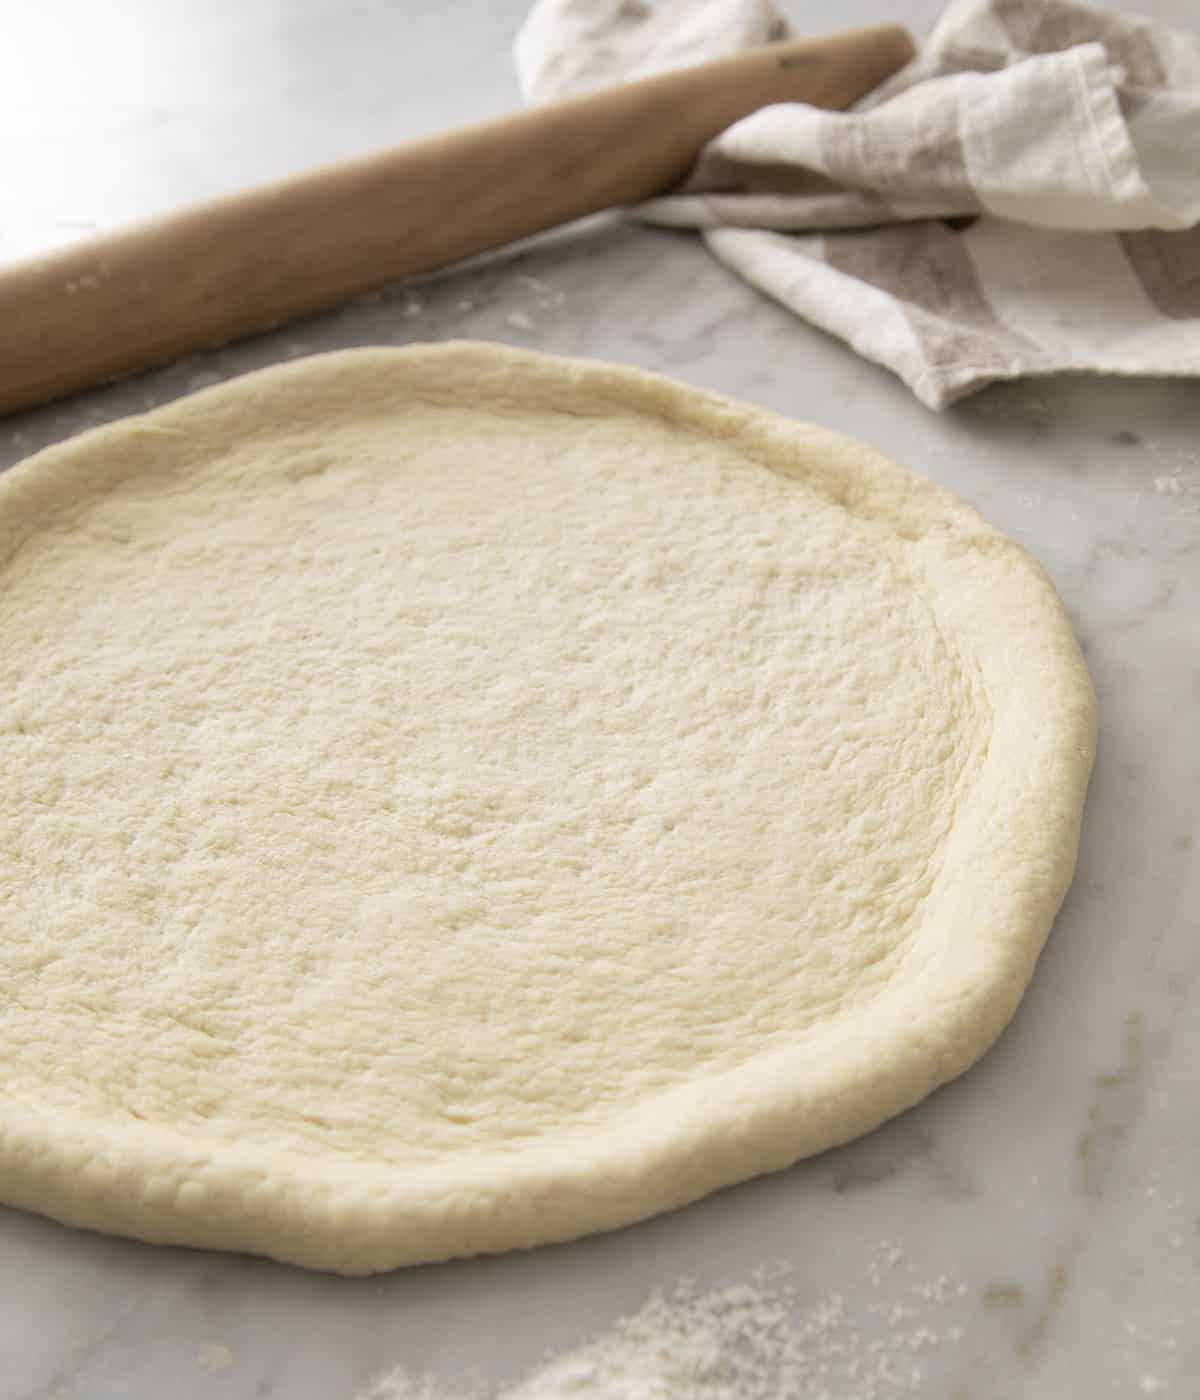 A pizza dough rolled out, ready for sauce and cheese to be added.